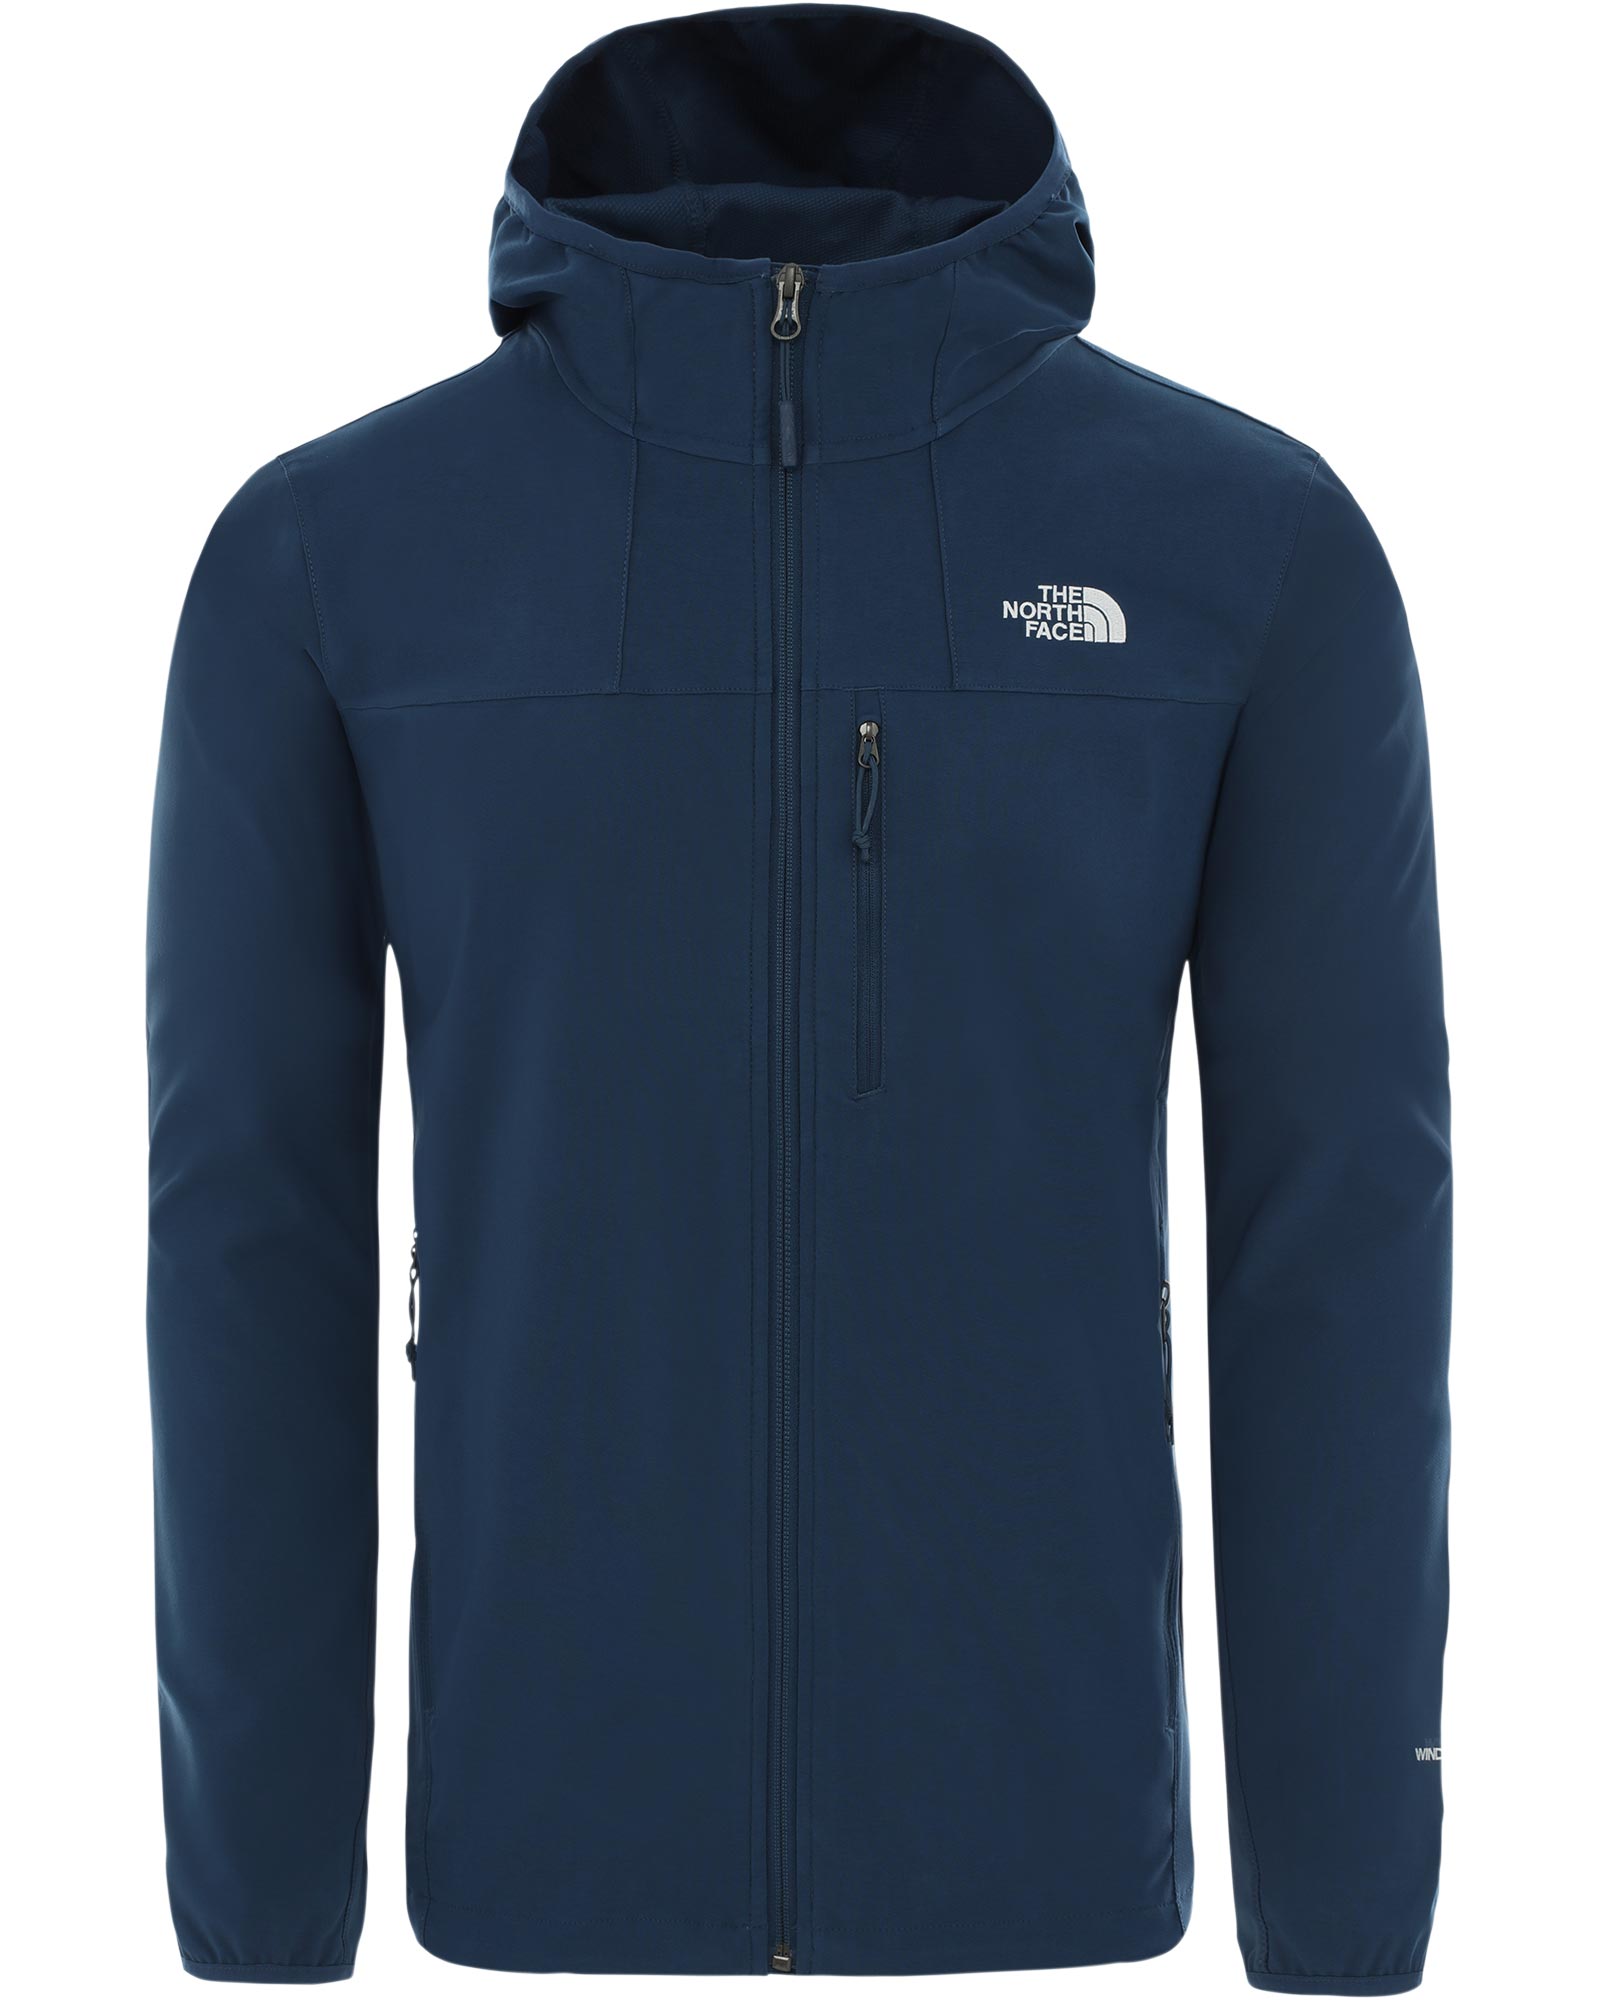 The North Face Nimble Men’s Hoodie - Blue Wing Teal S